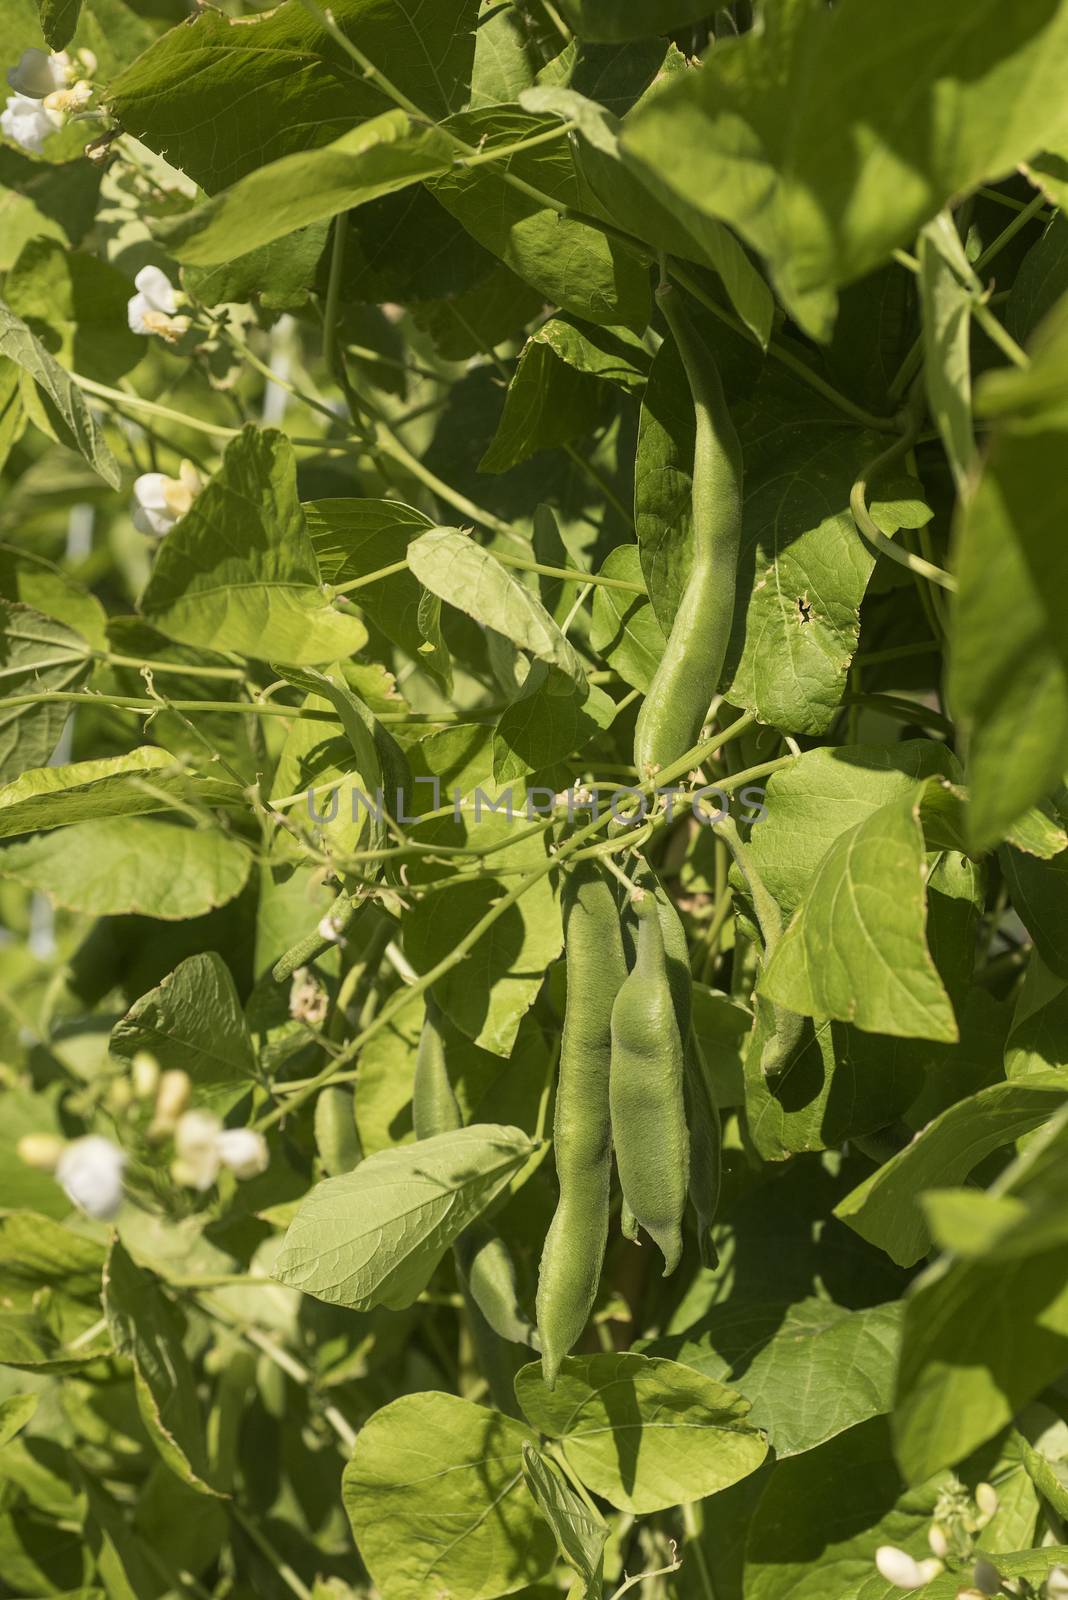 Bean plants in the garden by jalonsohu@gmail.com